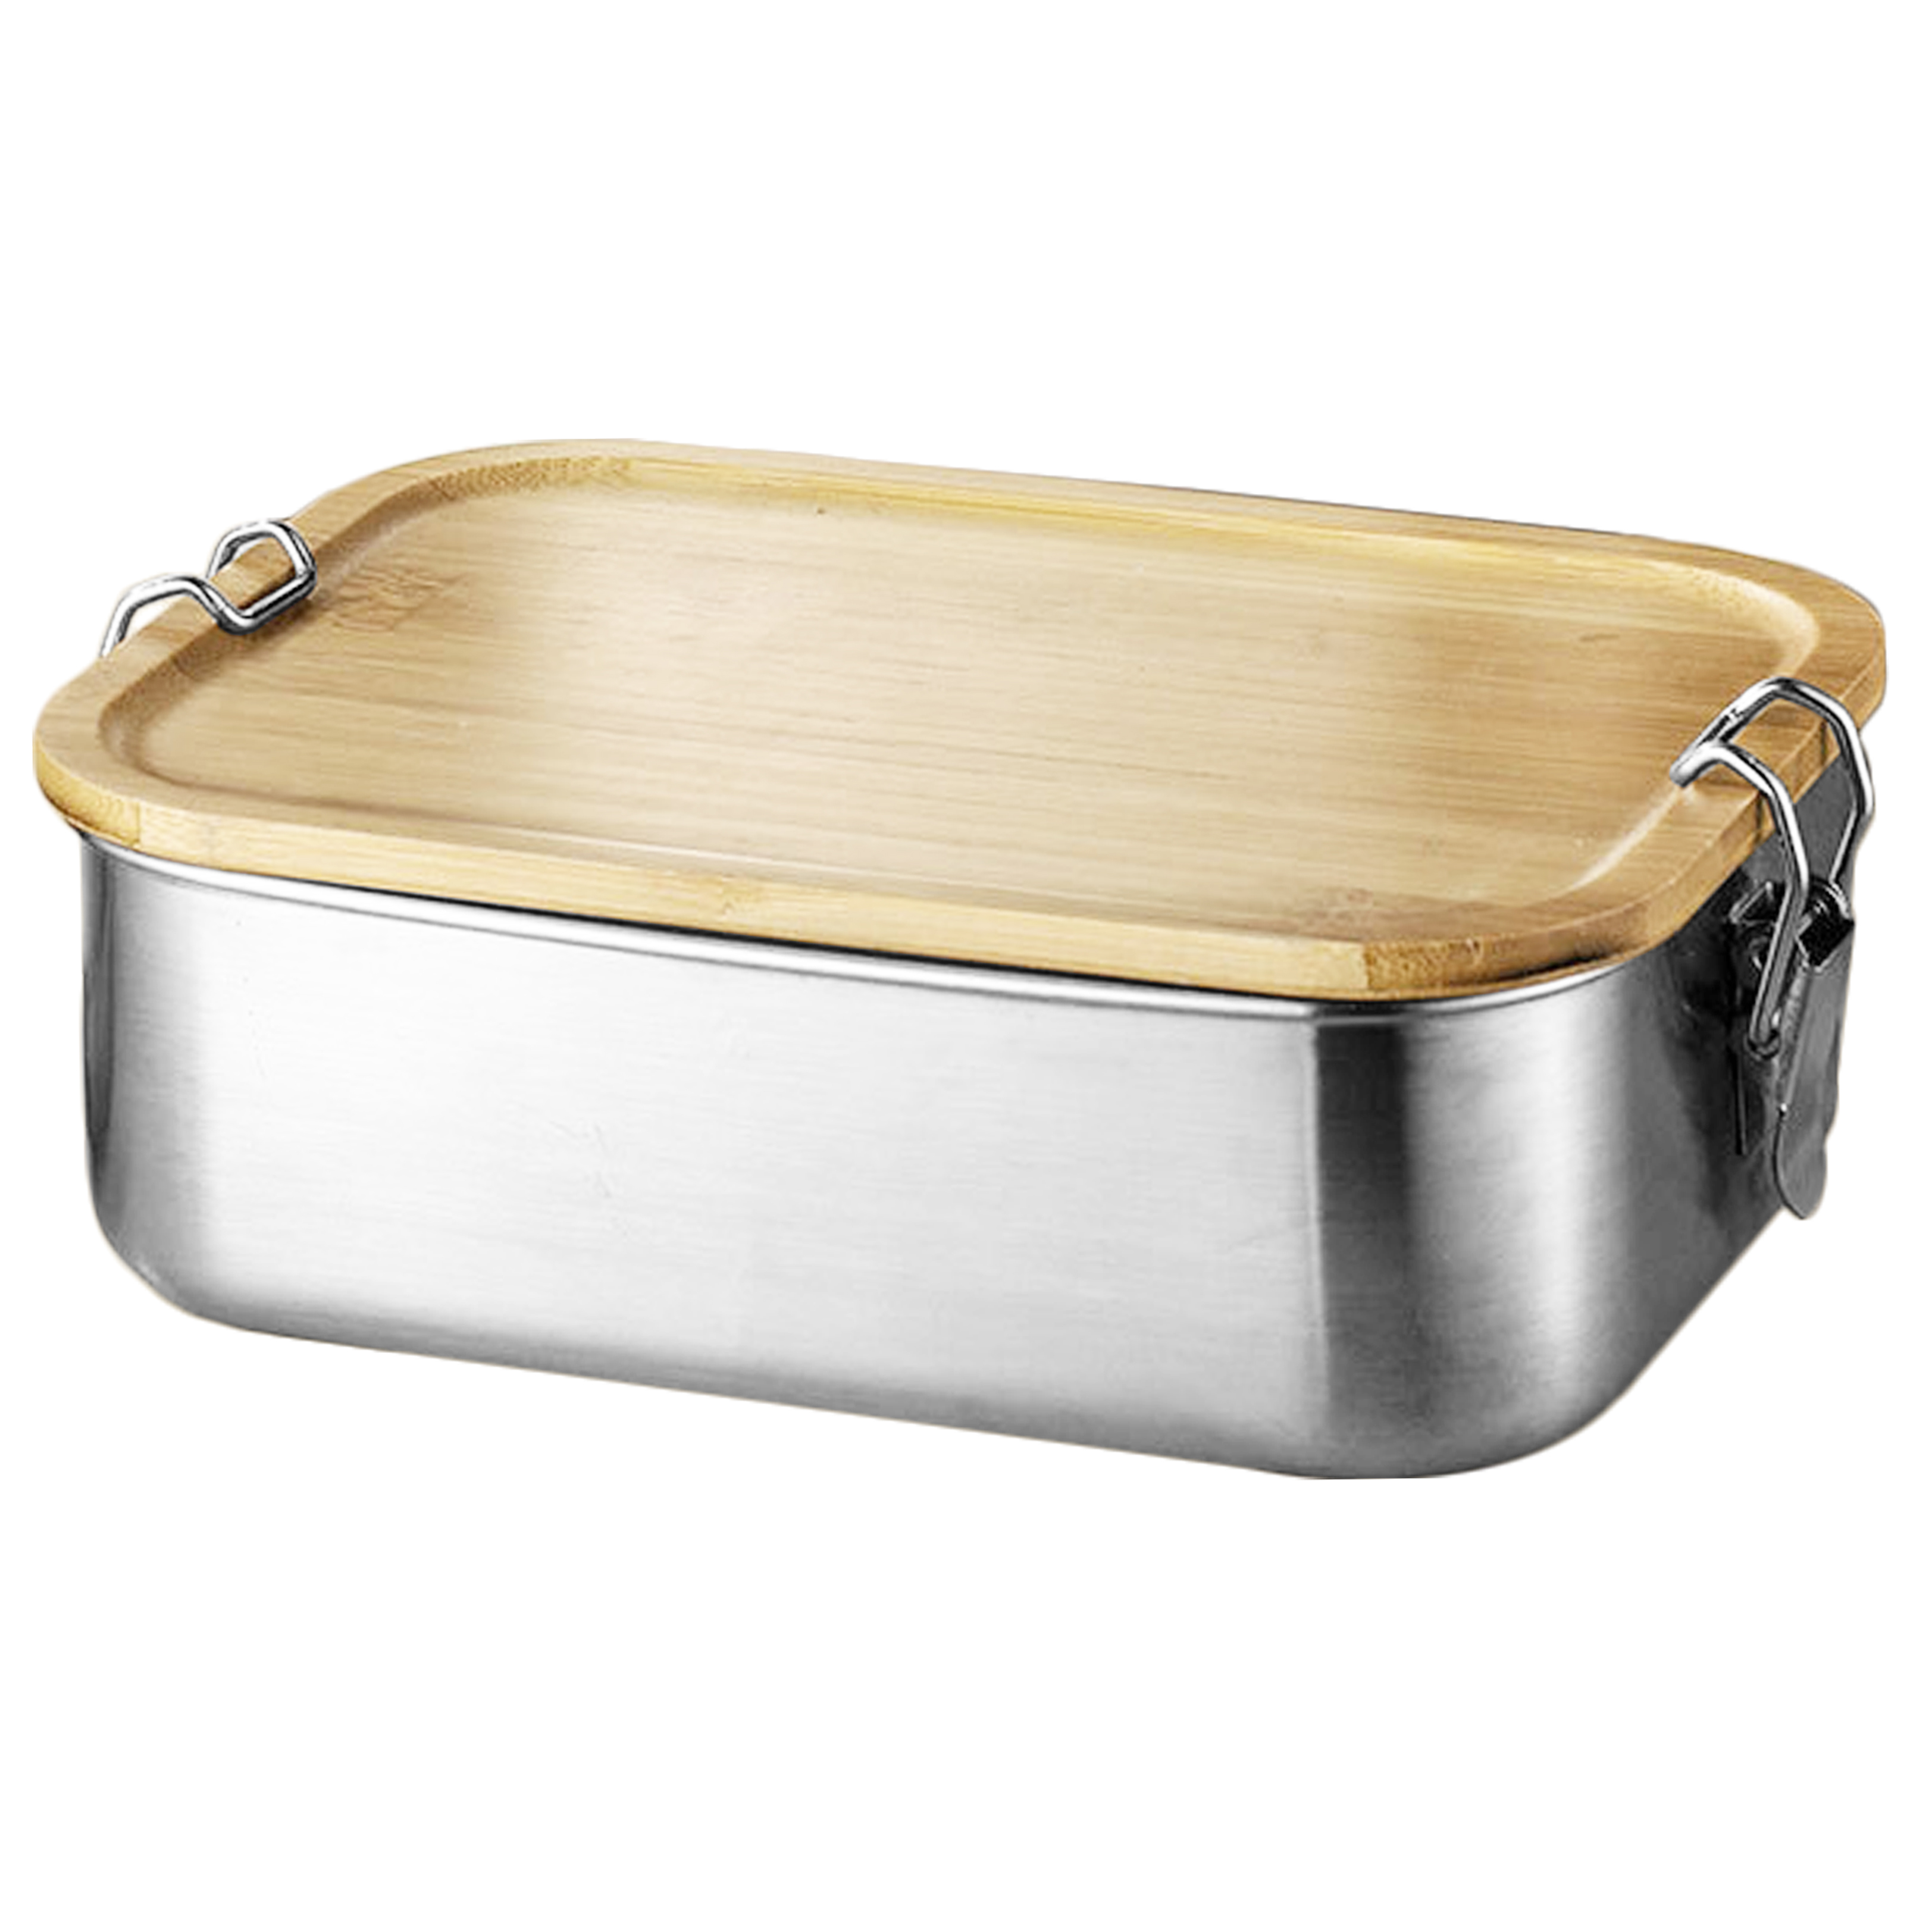 Portable outdoor camping metal stainless steel Food Storage Container lunch box with bamboo lid